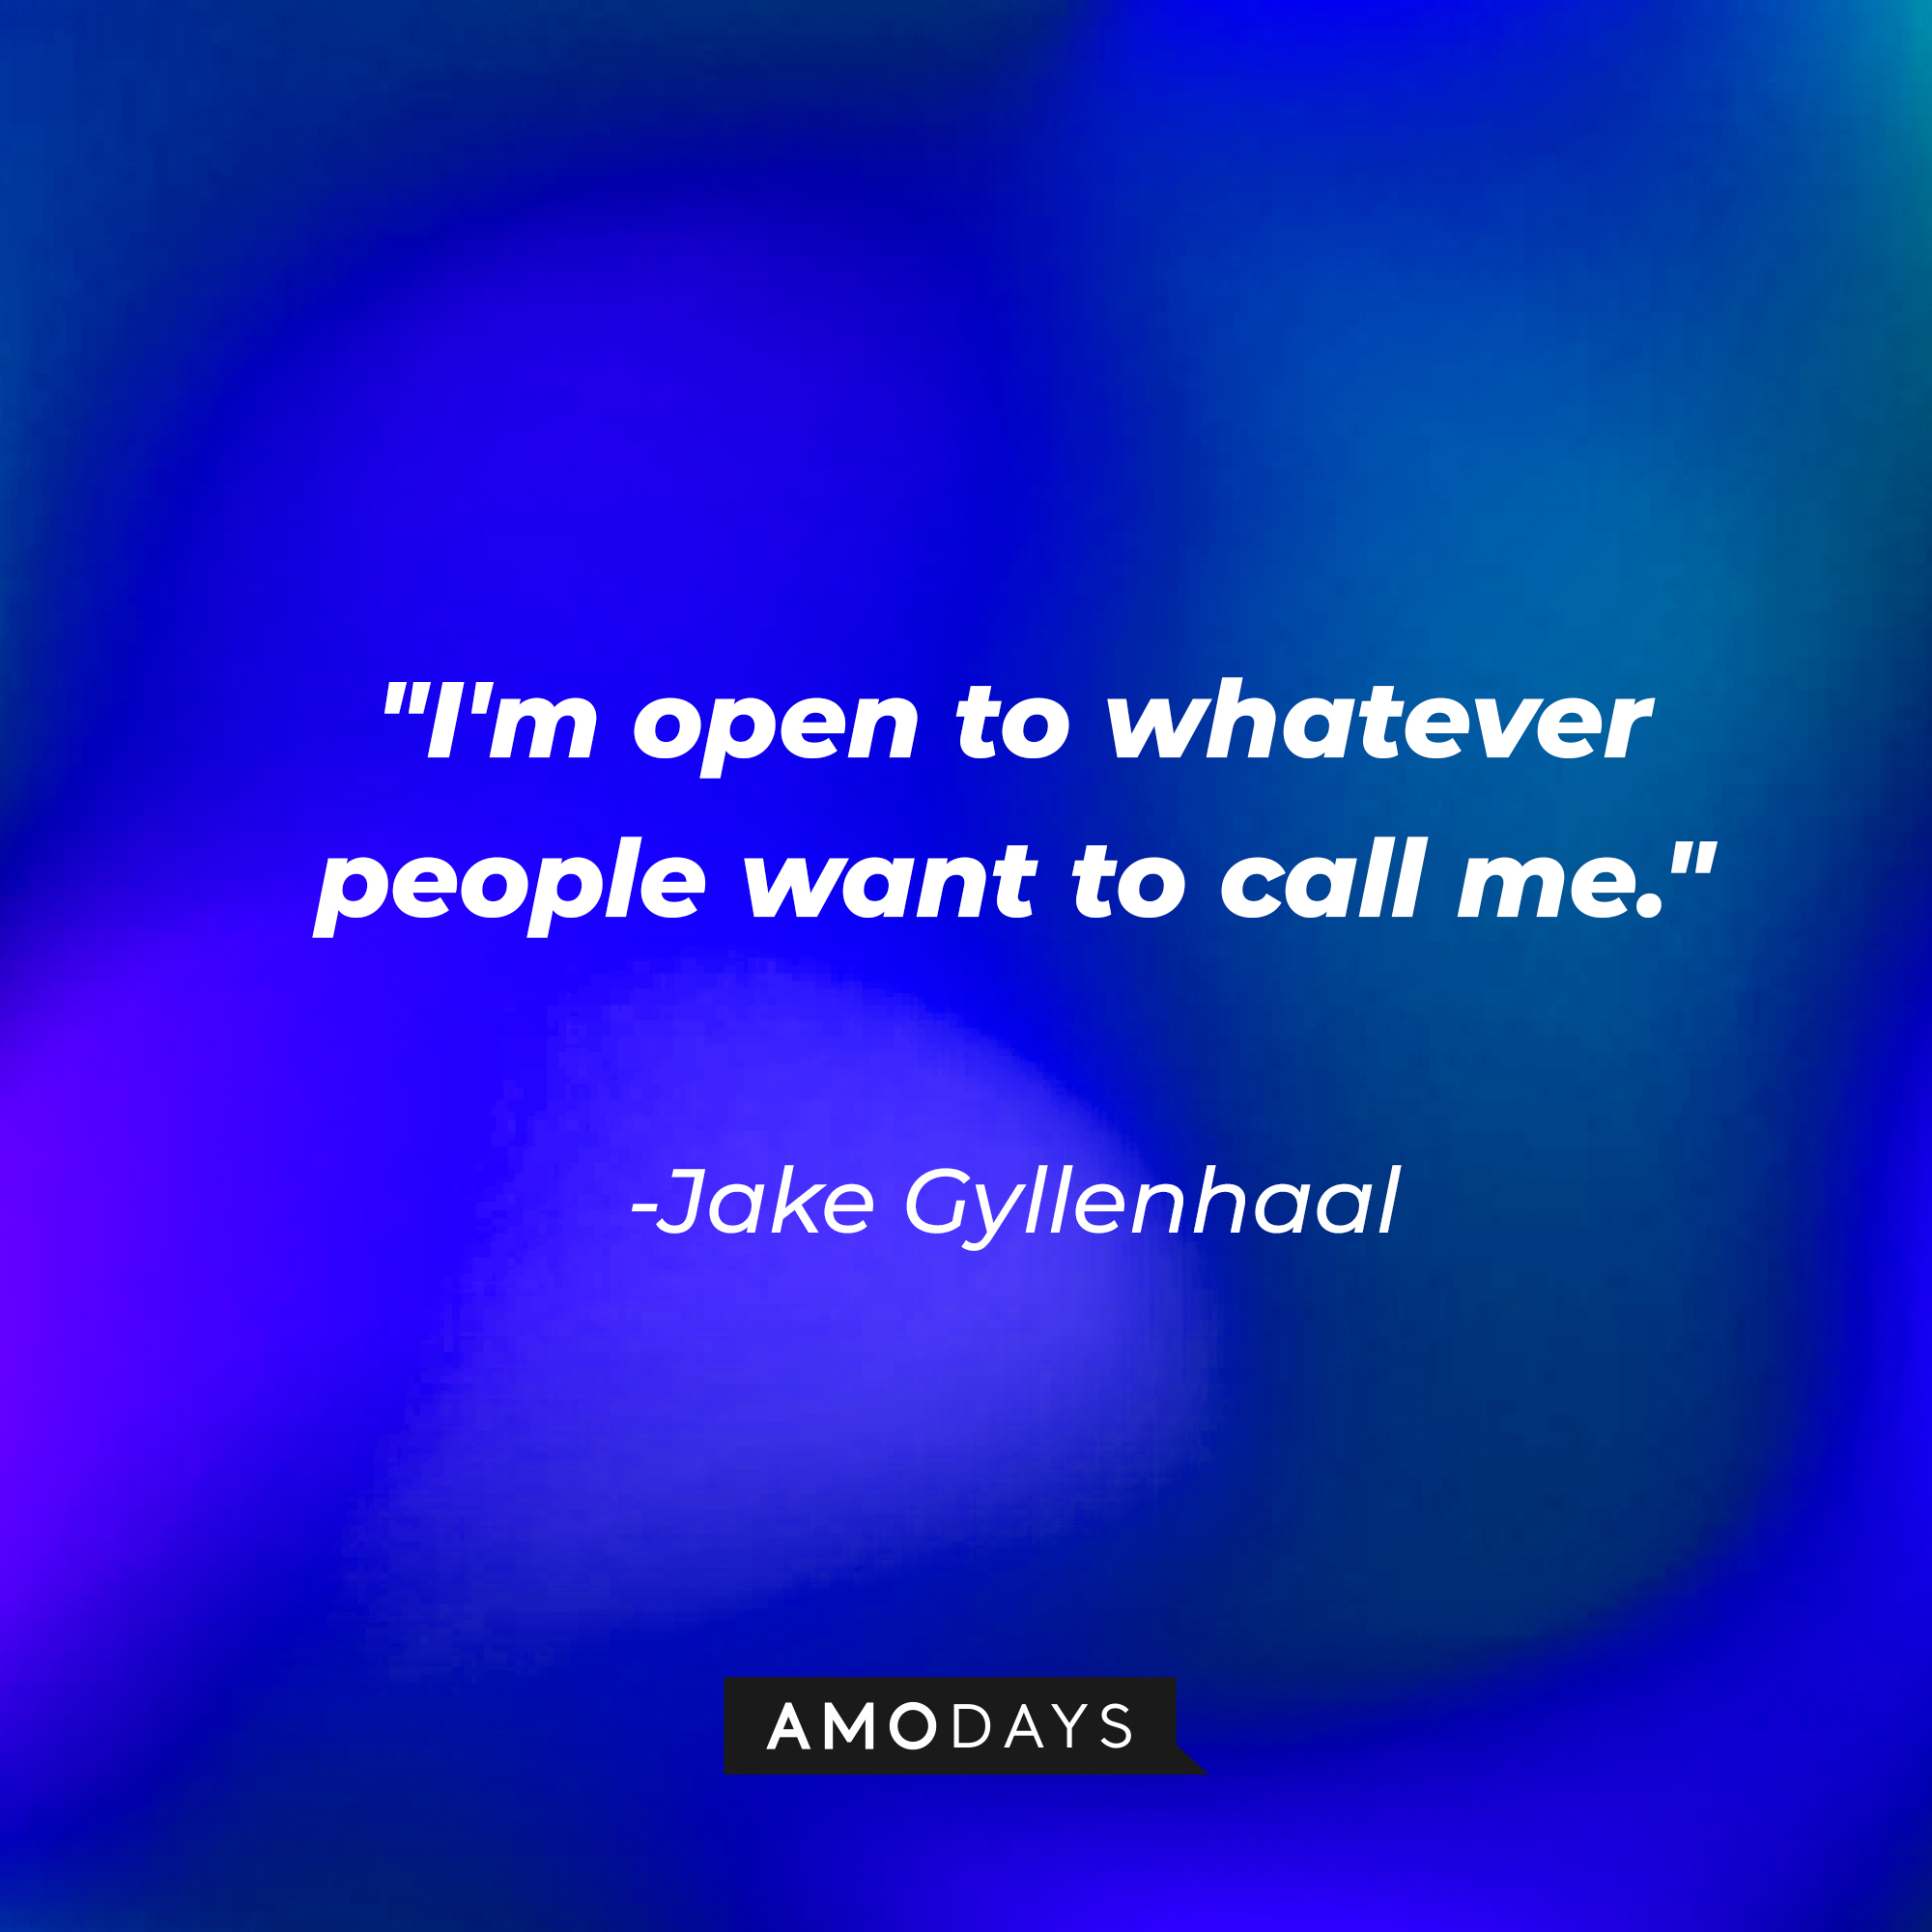 Jake Gyllenhaal's quote: "I'm open to whatever people want to call me." | Source: AmoDays